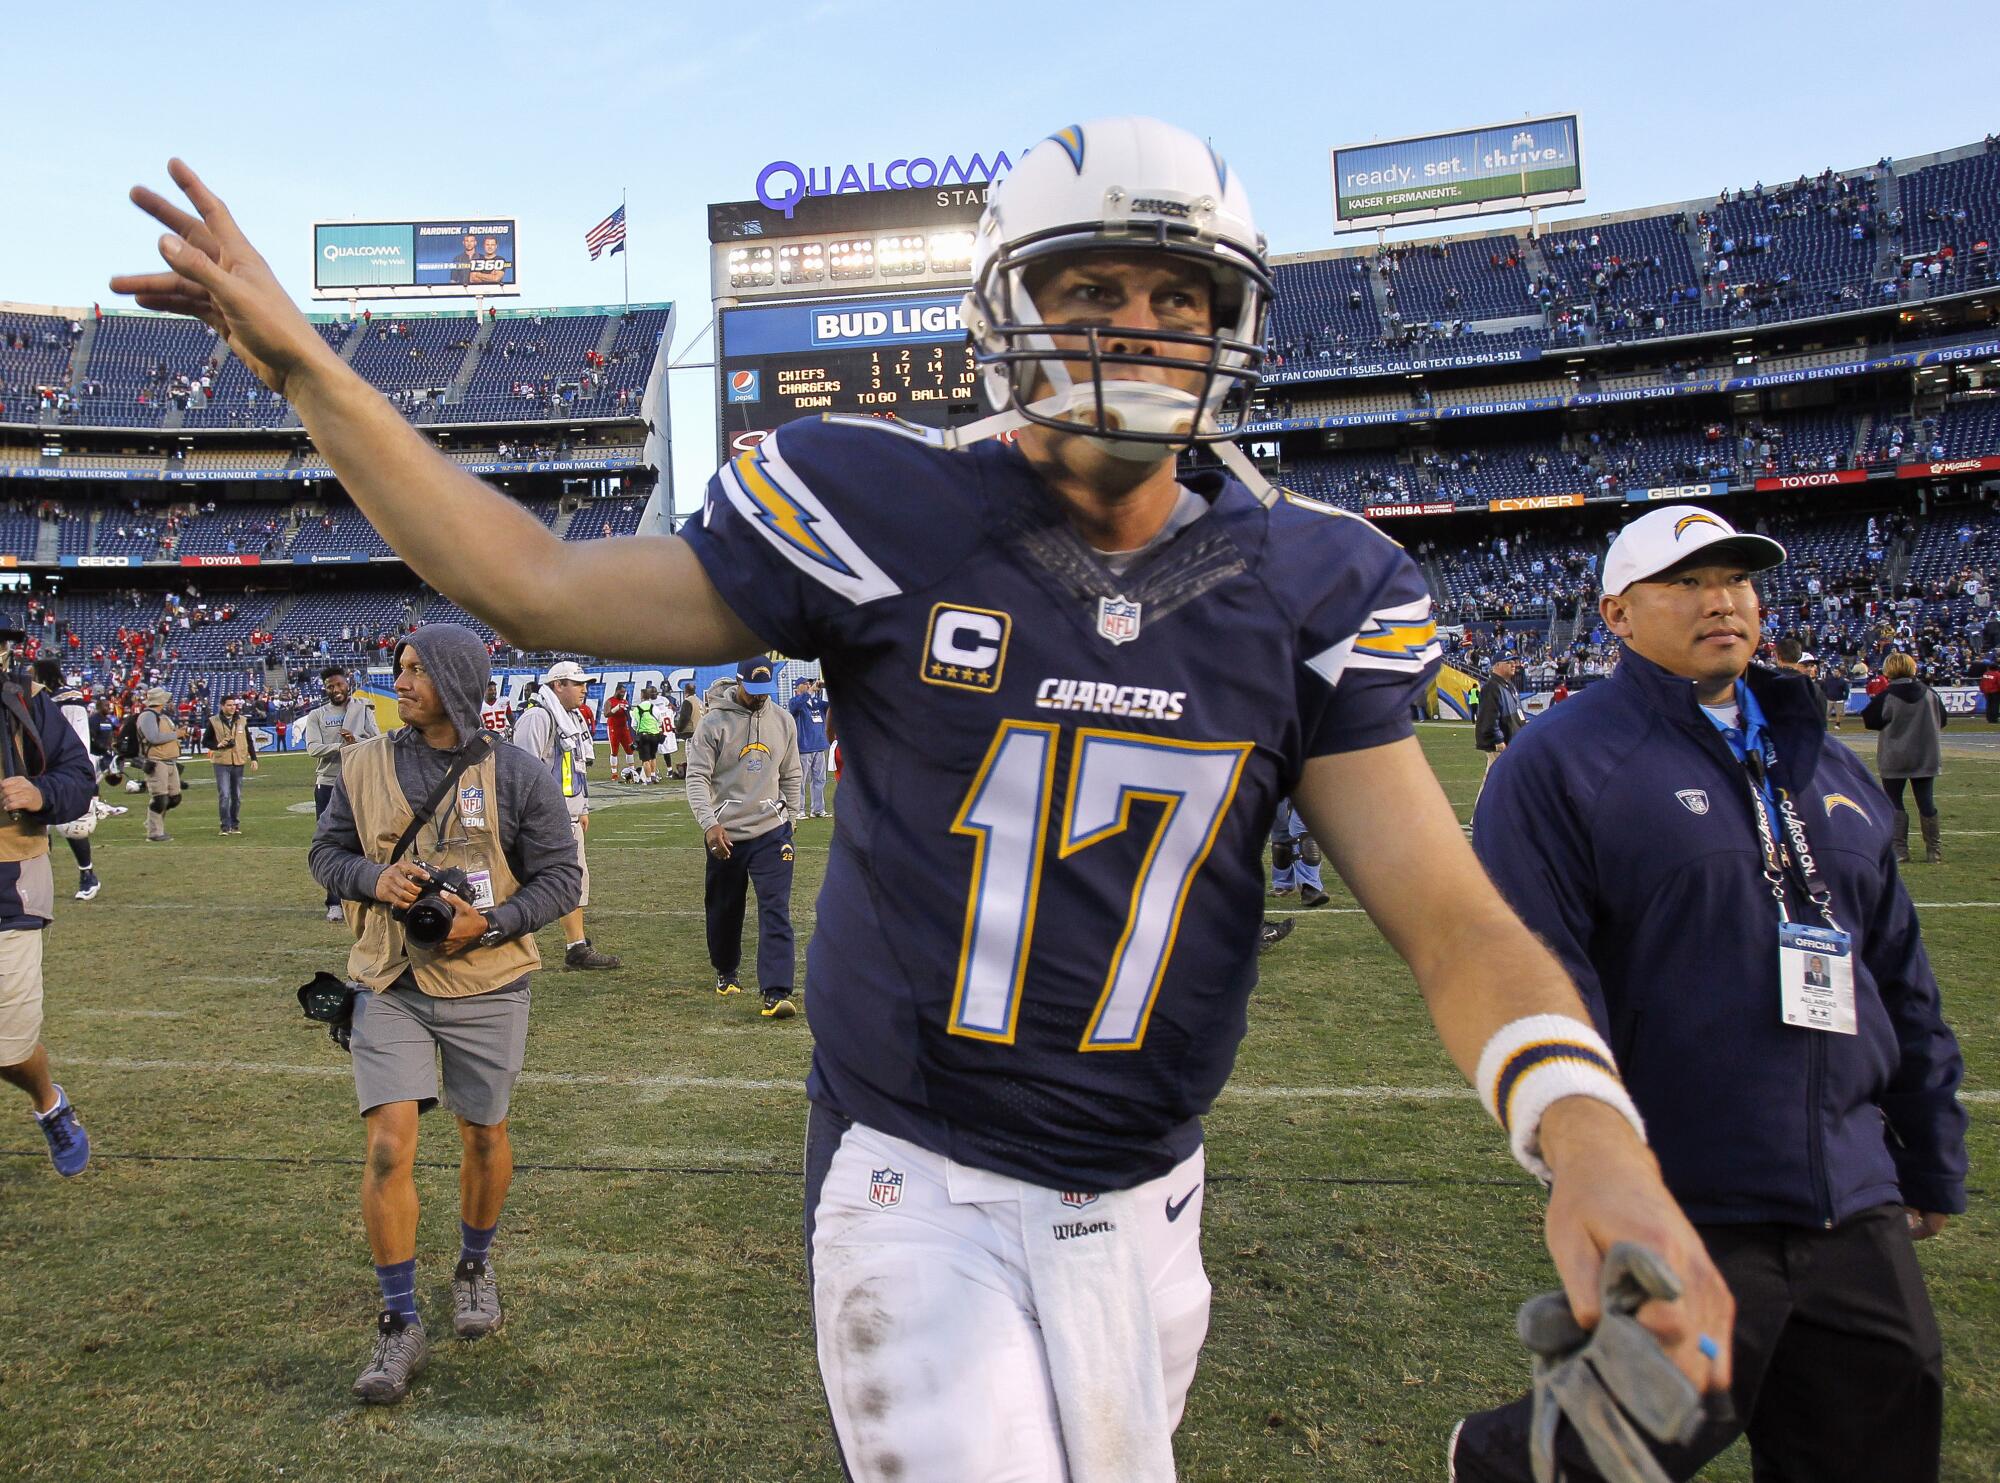 Chargers quarterback Philip Rivers waves as he leaves the field after losing to Kansas City at Qualcomm Stadium.